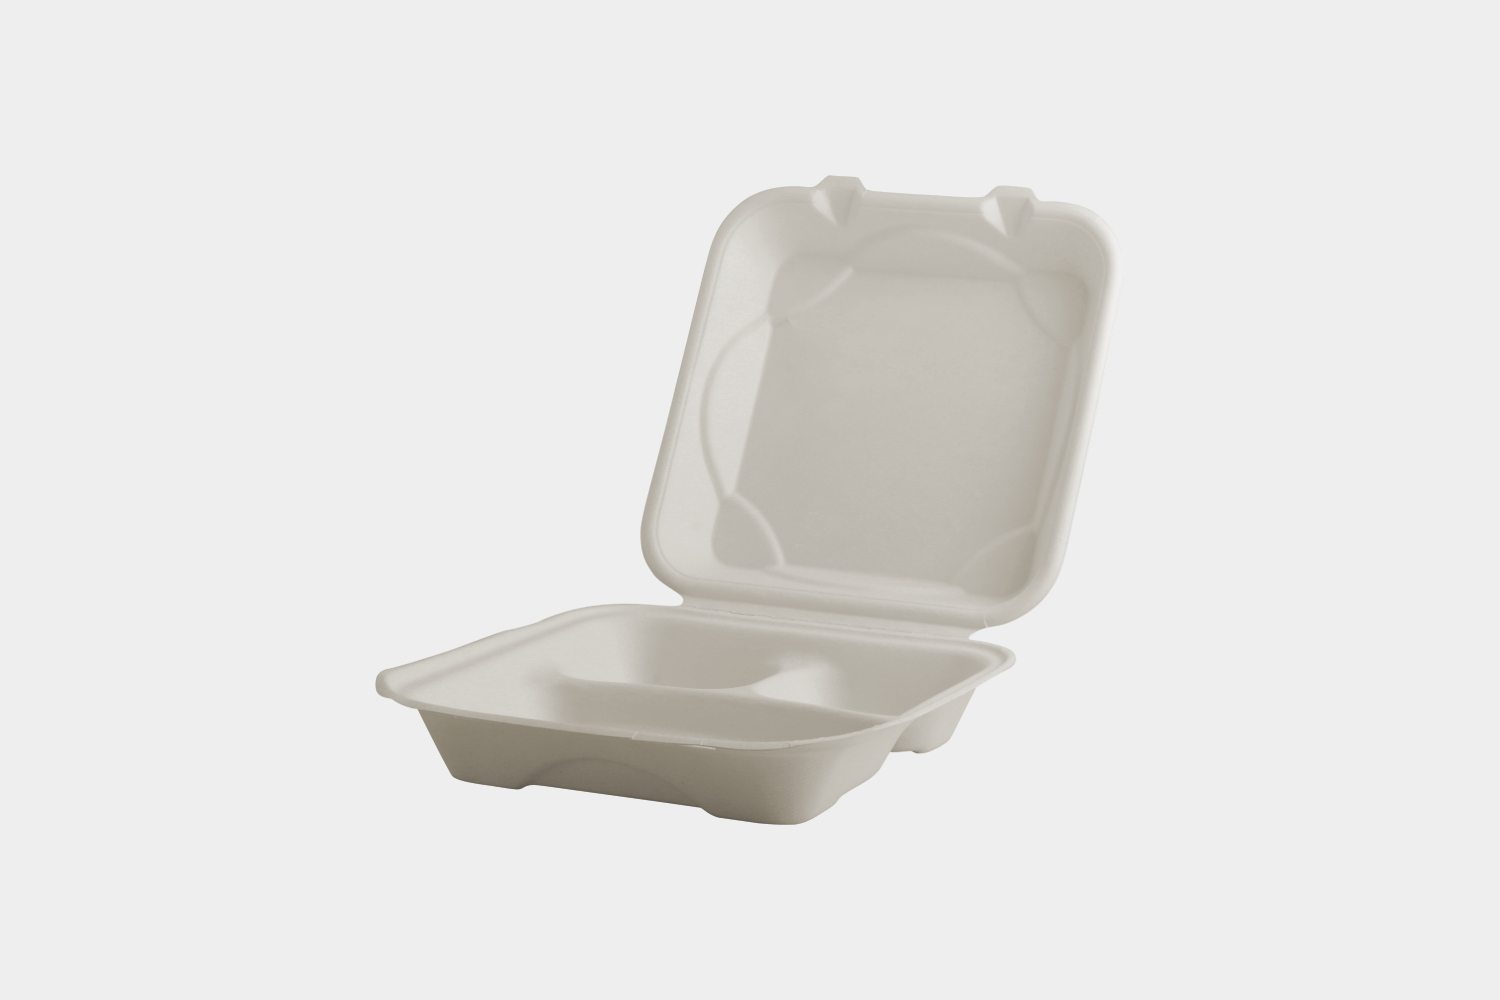 https://www.ecolates.com/wp-content/uploads/2023/02/3-compartments-9-inch-sugarcane-bagasse-takeout-box-with-hinged-lid-container-front-view.jpg